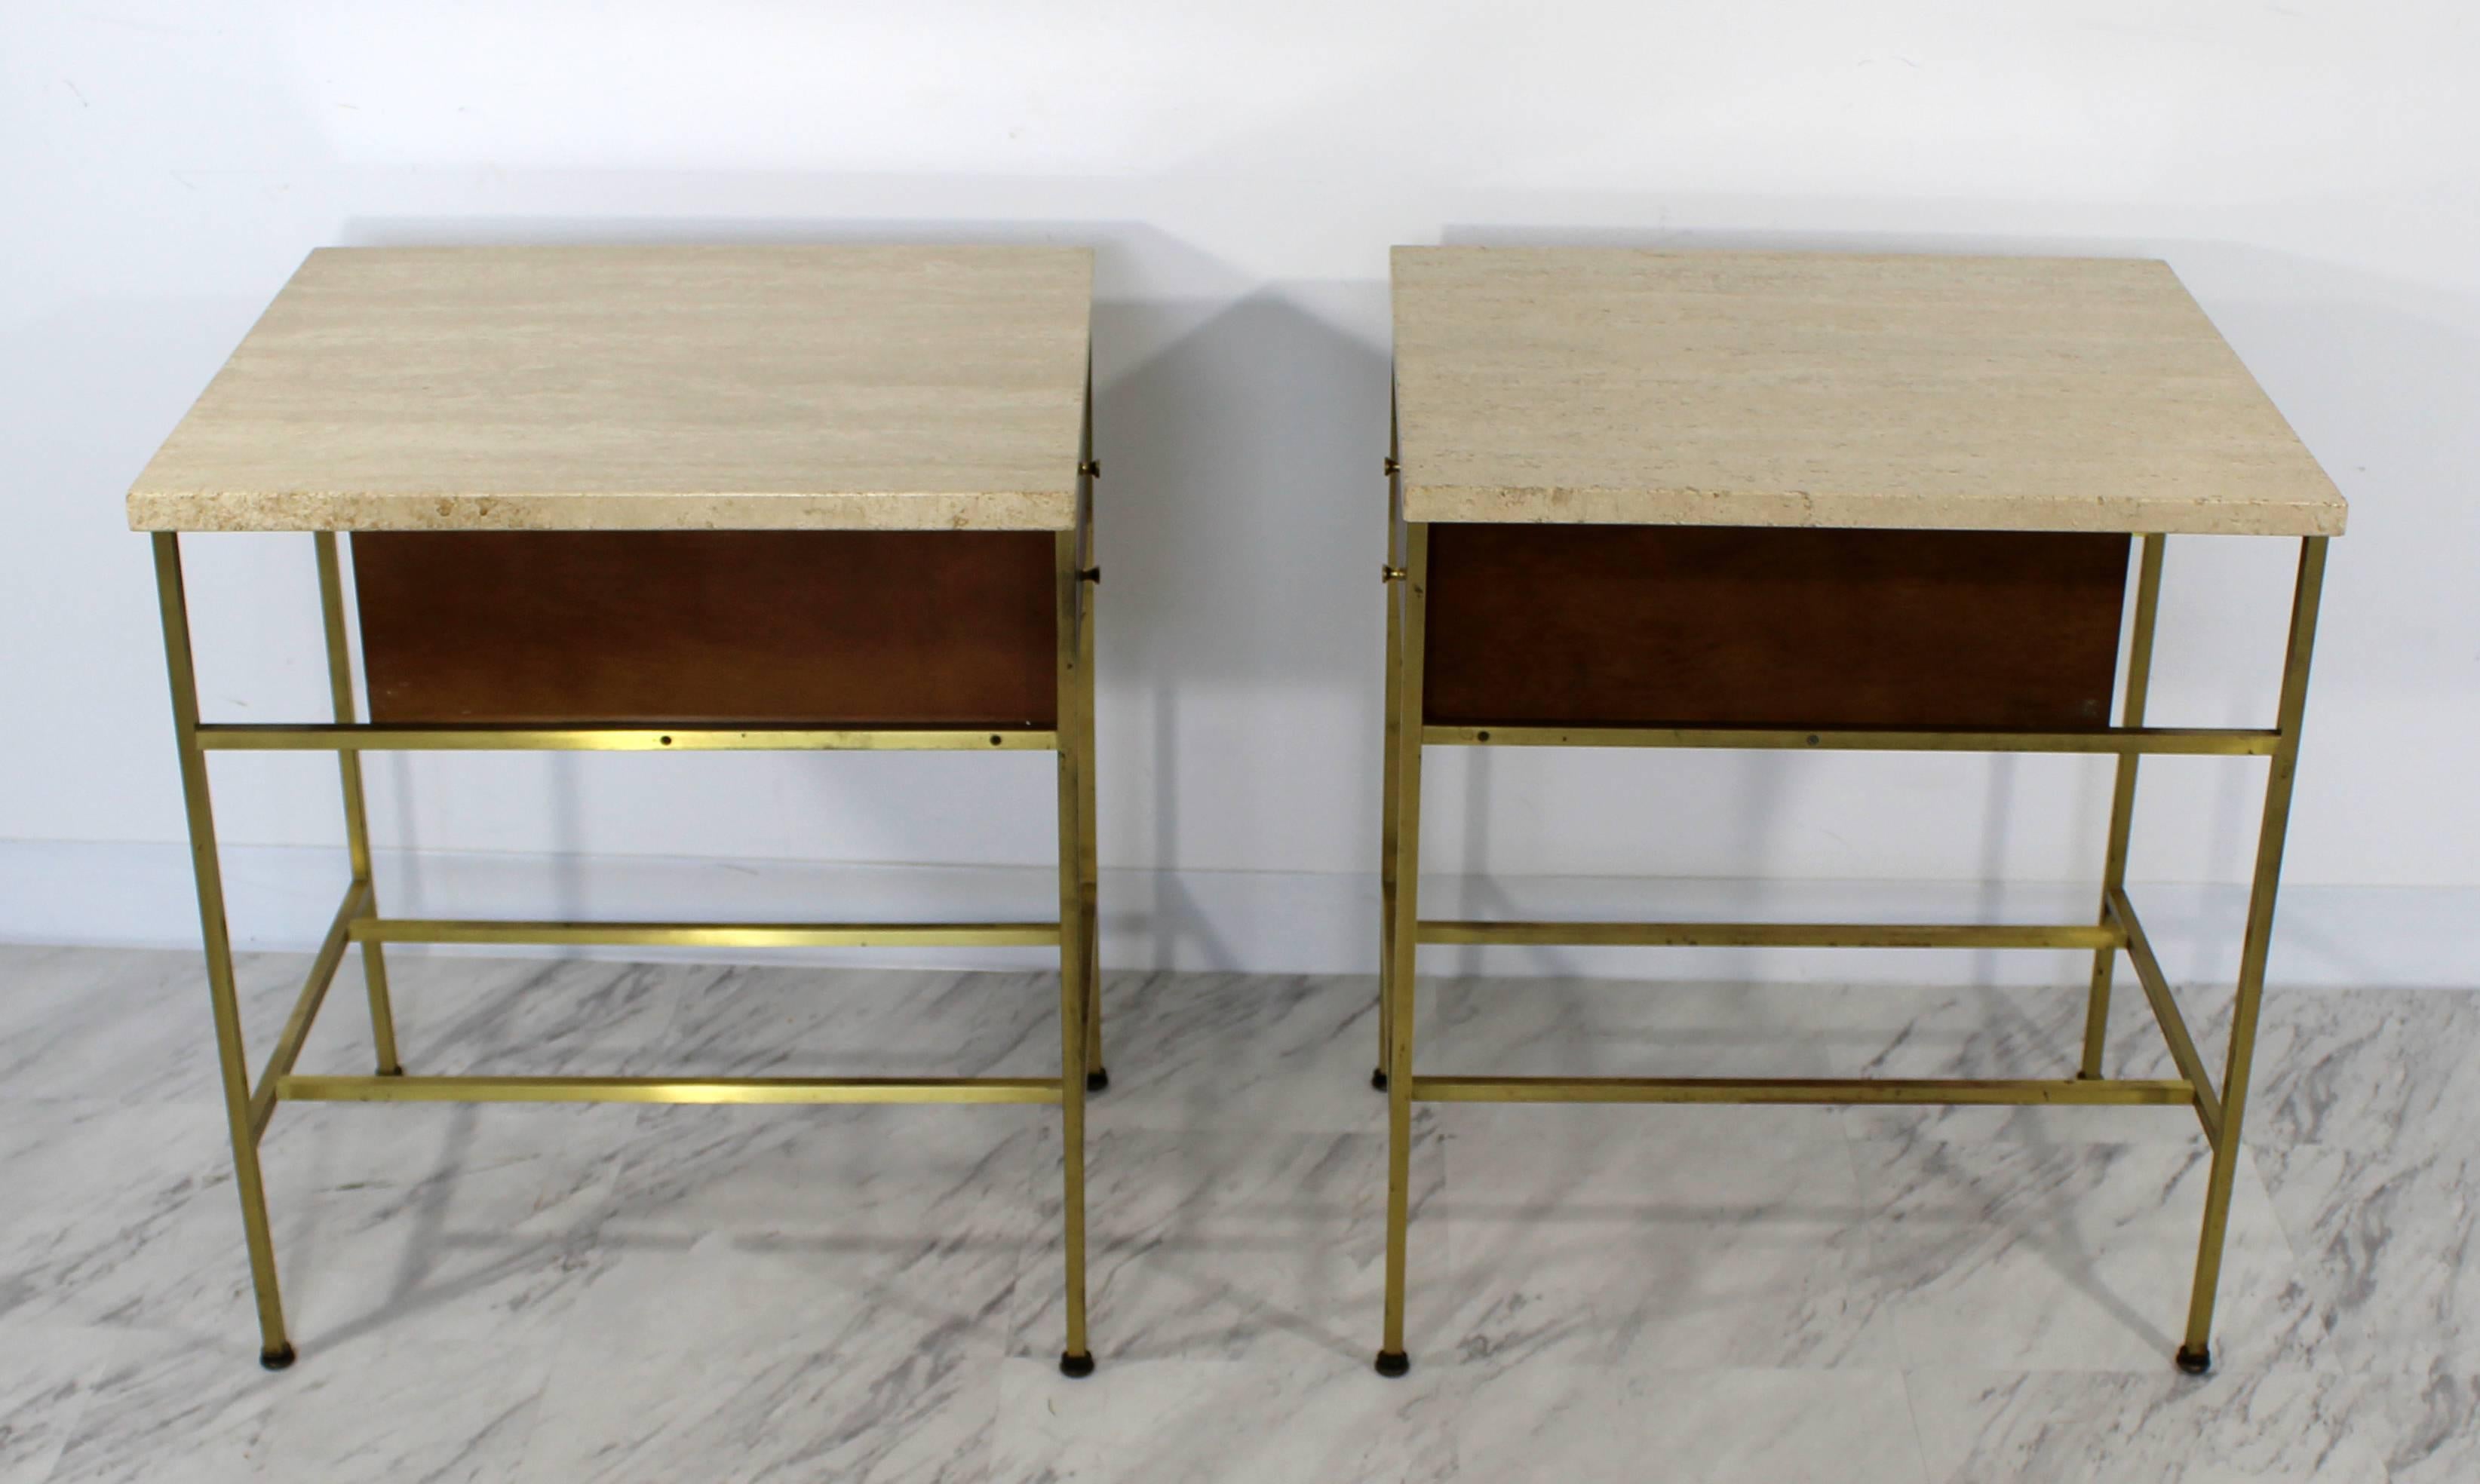 For your consideration is a standout pair of nightstands or side tables, with travertine tops, brass bases and two drawers each, designed by Paul McCobb for Calvin's Irwin collection. In very good condition. The dimensions are 20